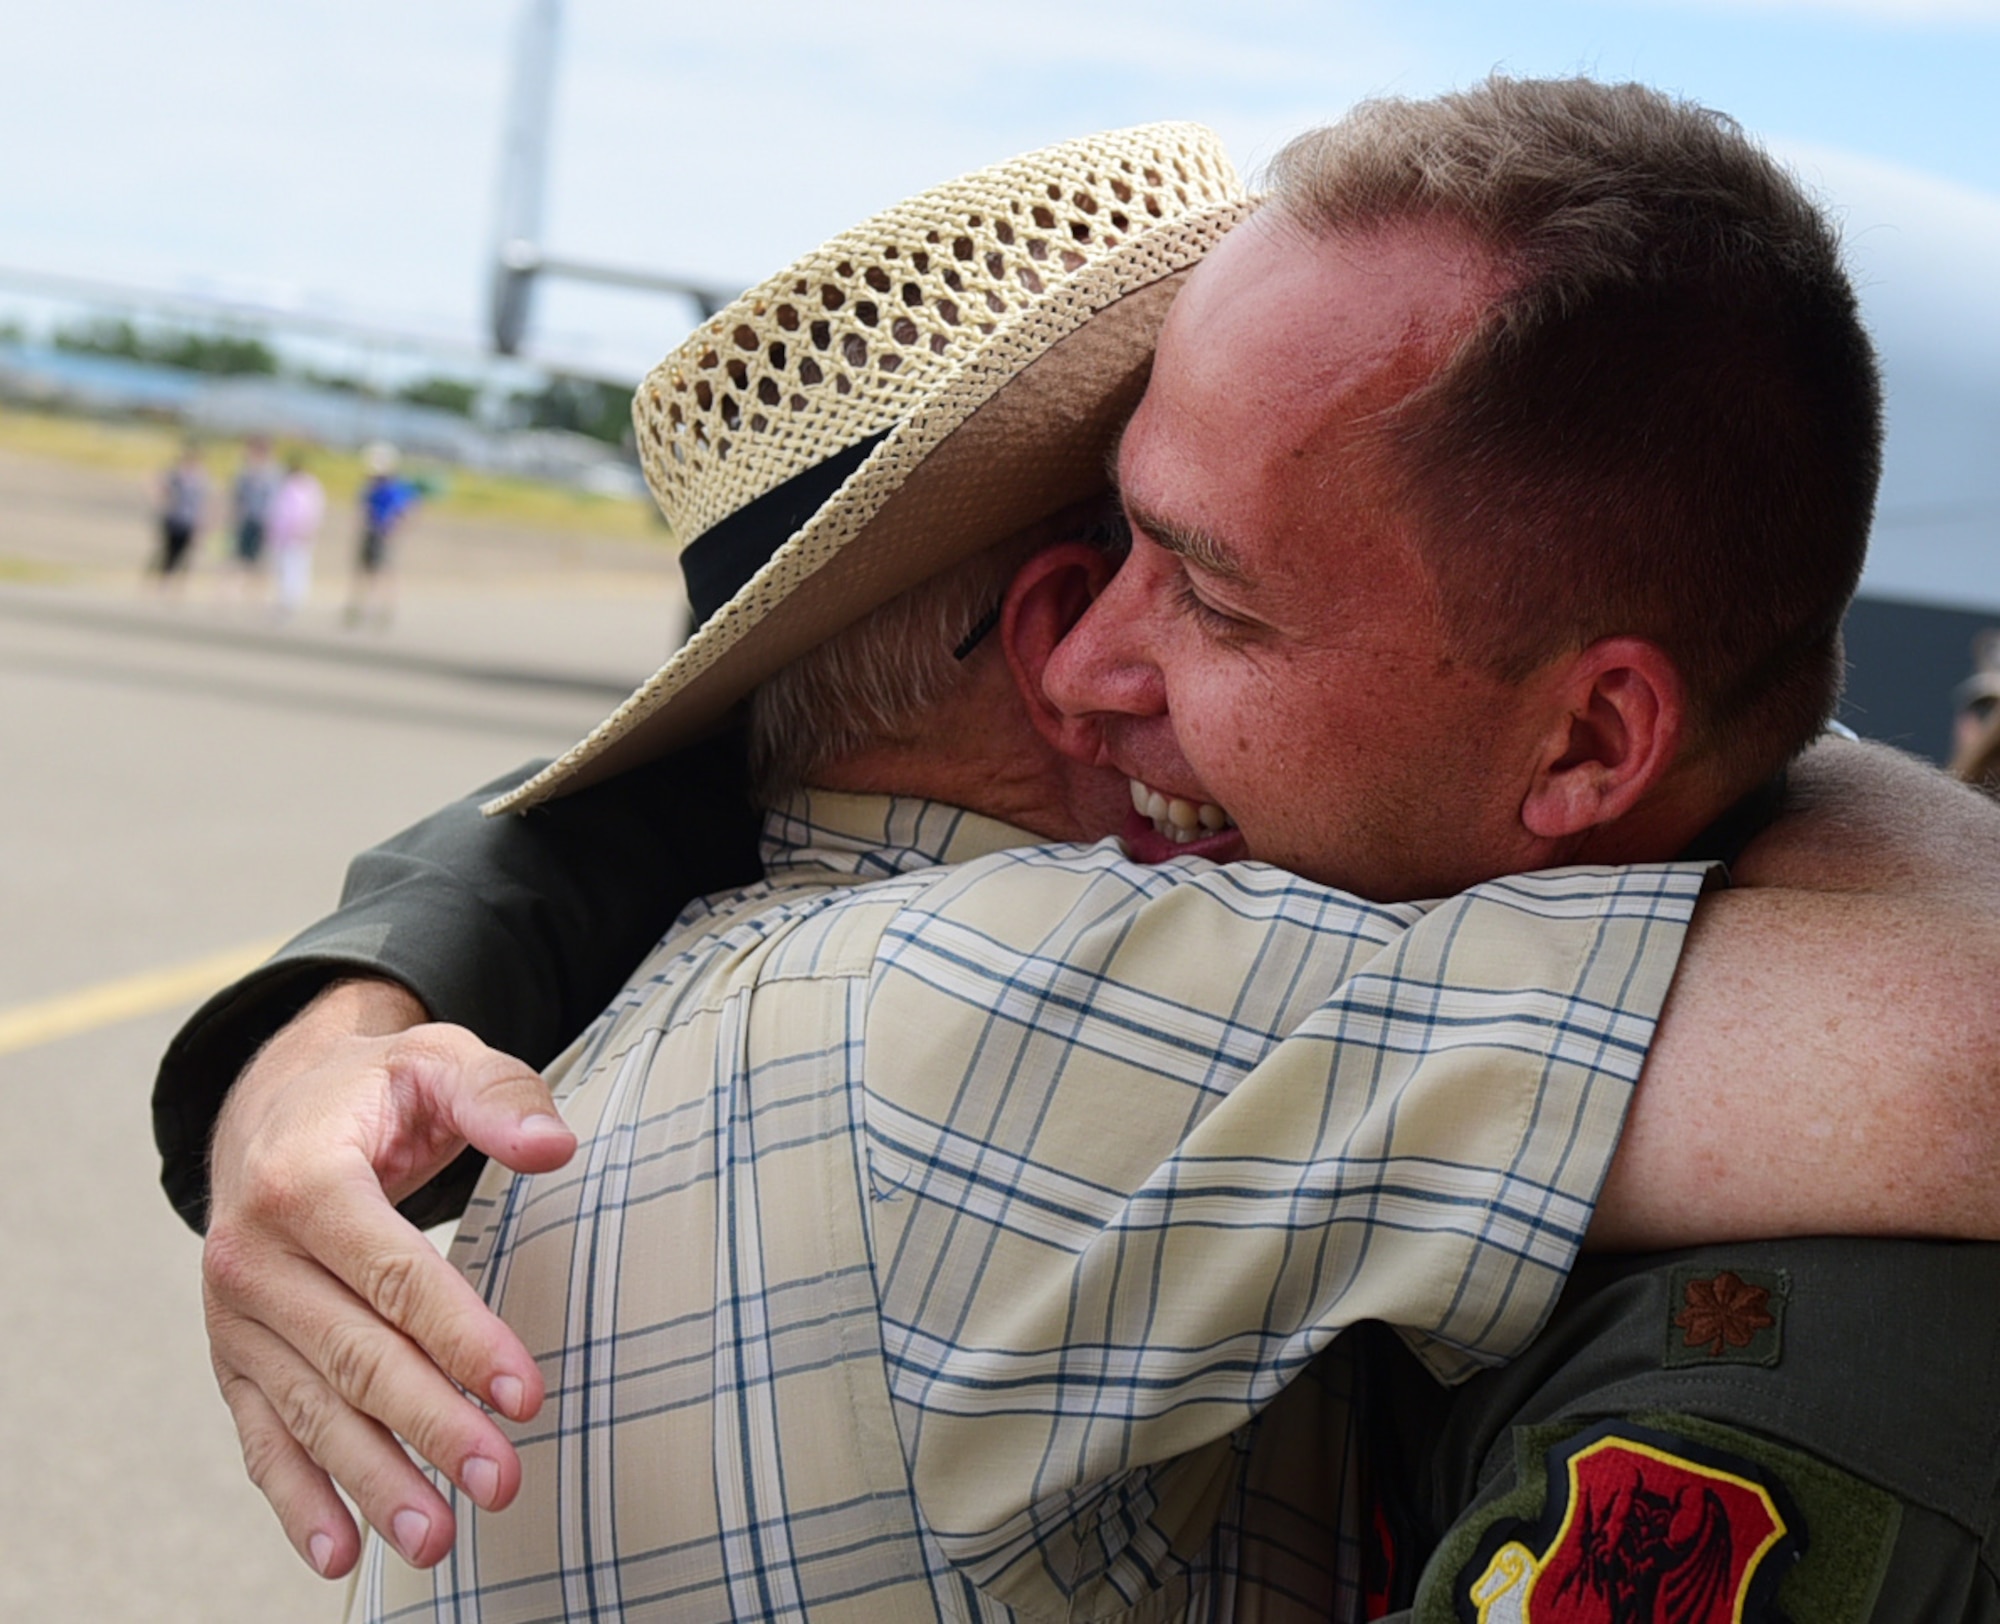 Maj. Richard, 432nd Wing MQ-1 Predator pilot, hugs his uncle July 15, 2017, at the Lethbridge International Airshow in Alberta, Canada. Richard had the opportunity to visit family and friends while displaying the MQ-9 Reaper at the airshow where he first fell in love with aviation. (U.S. Air Force photo/Senior Airman Christian Clausen)